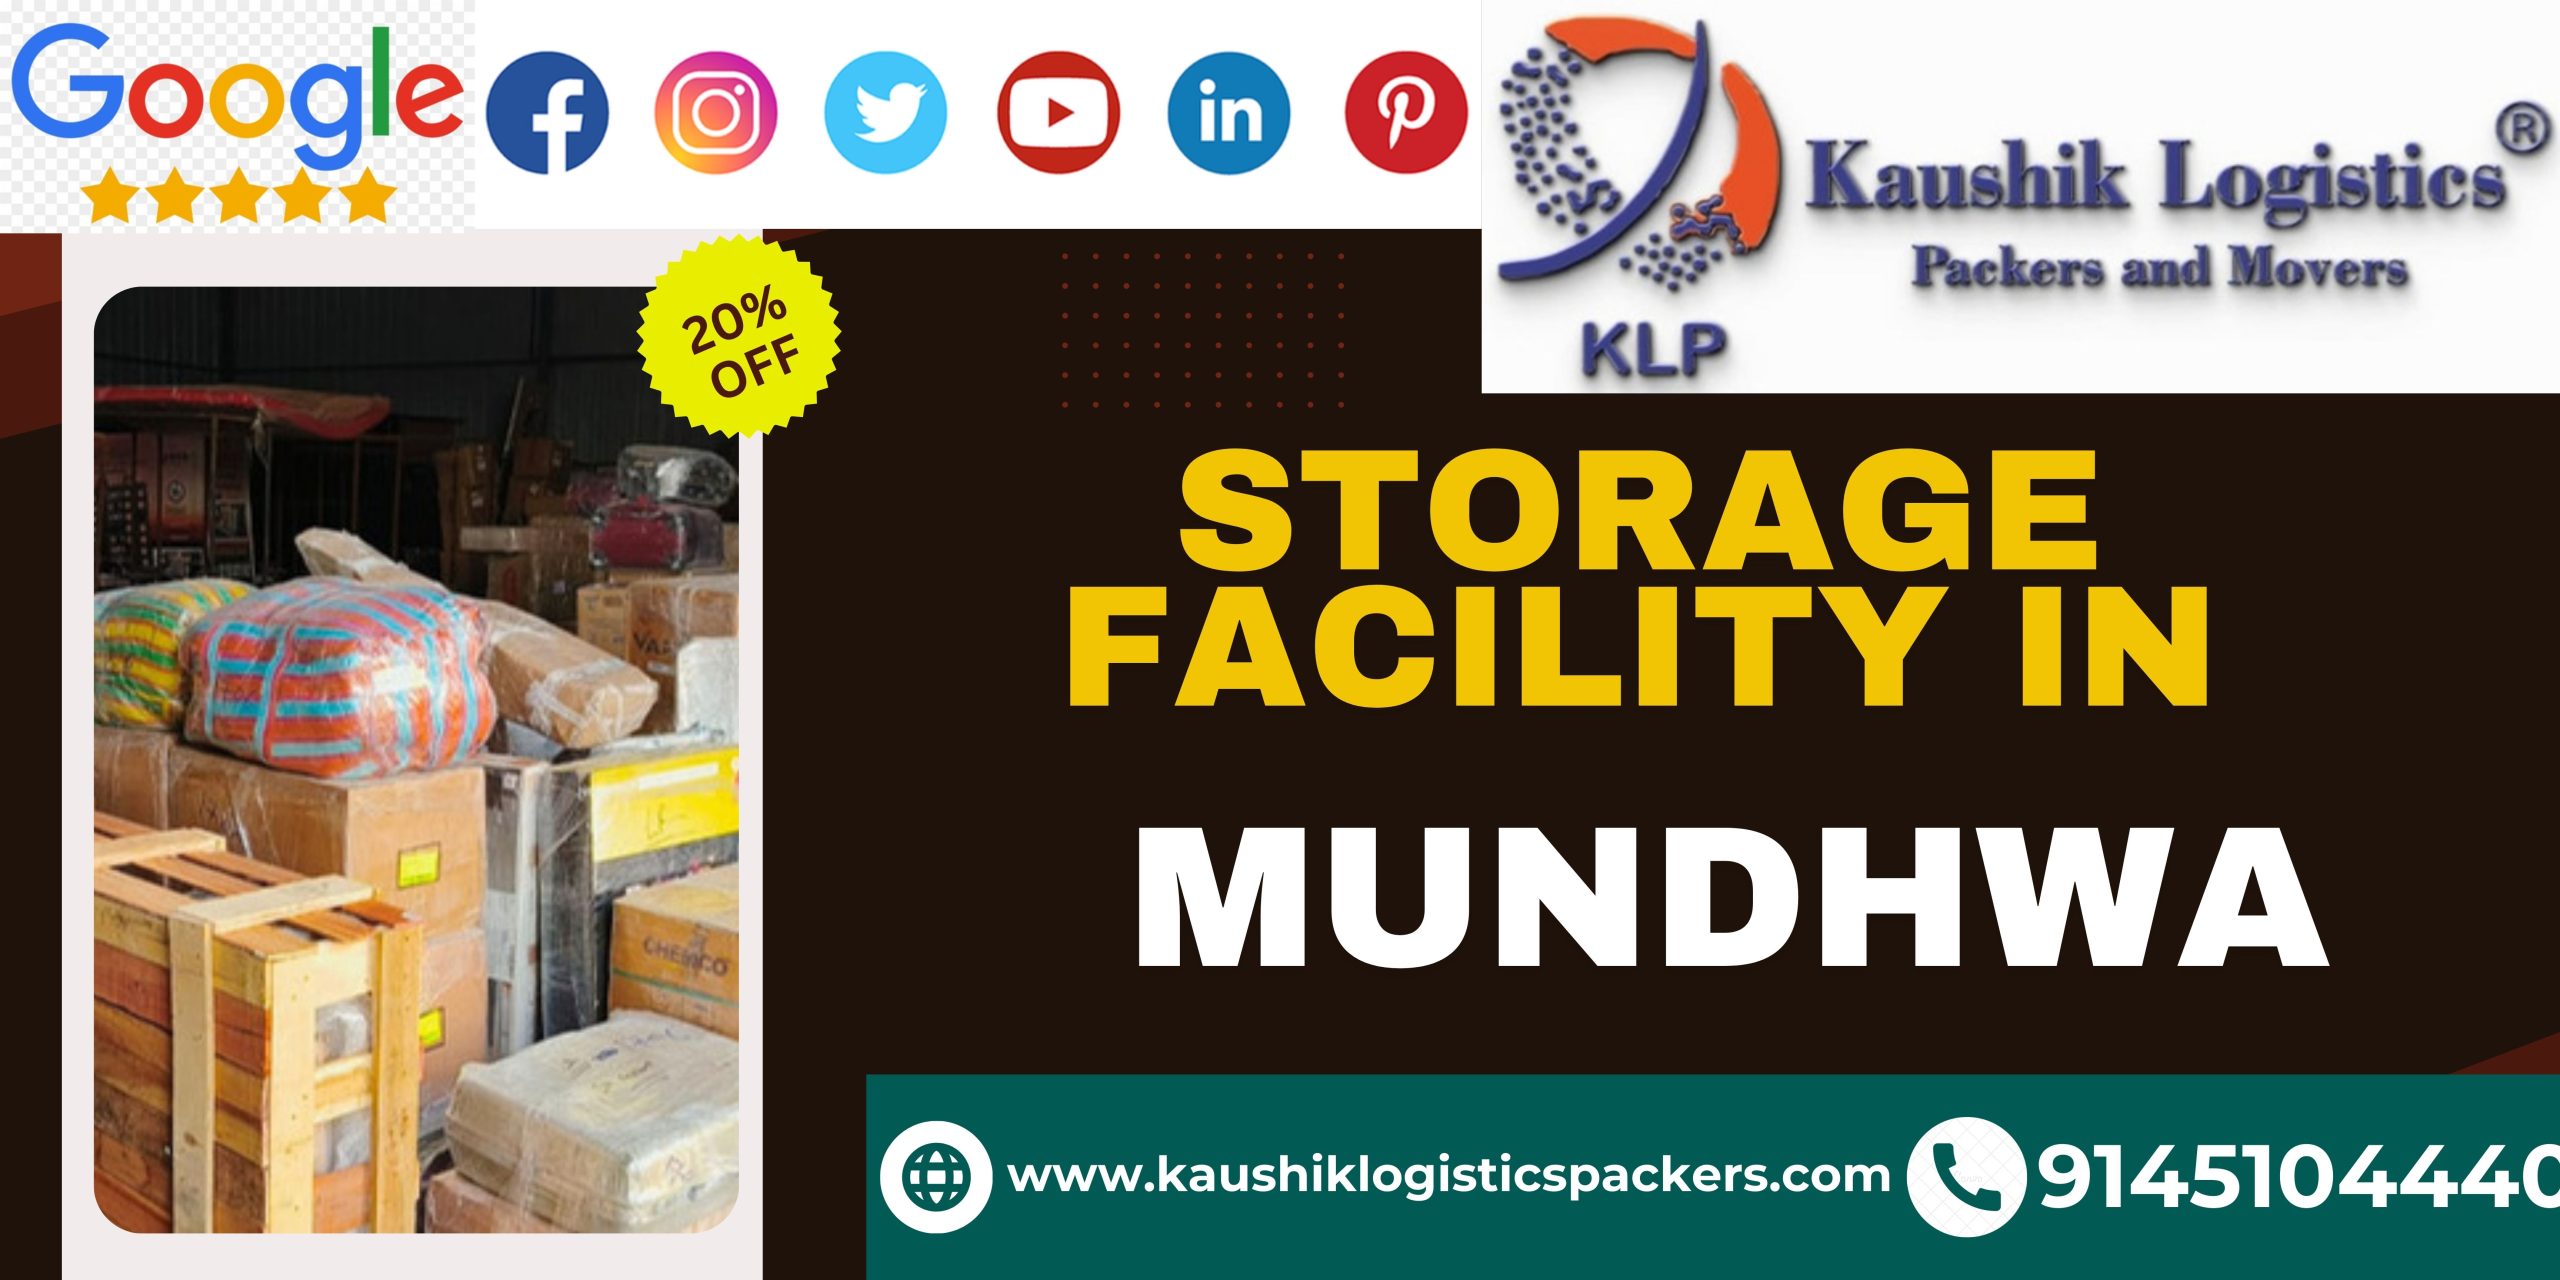 Packers and Movers In Mundhwa